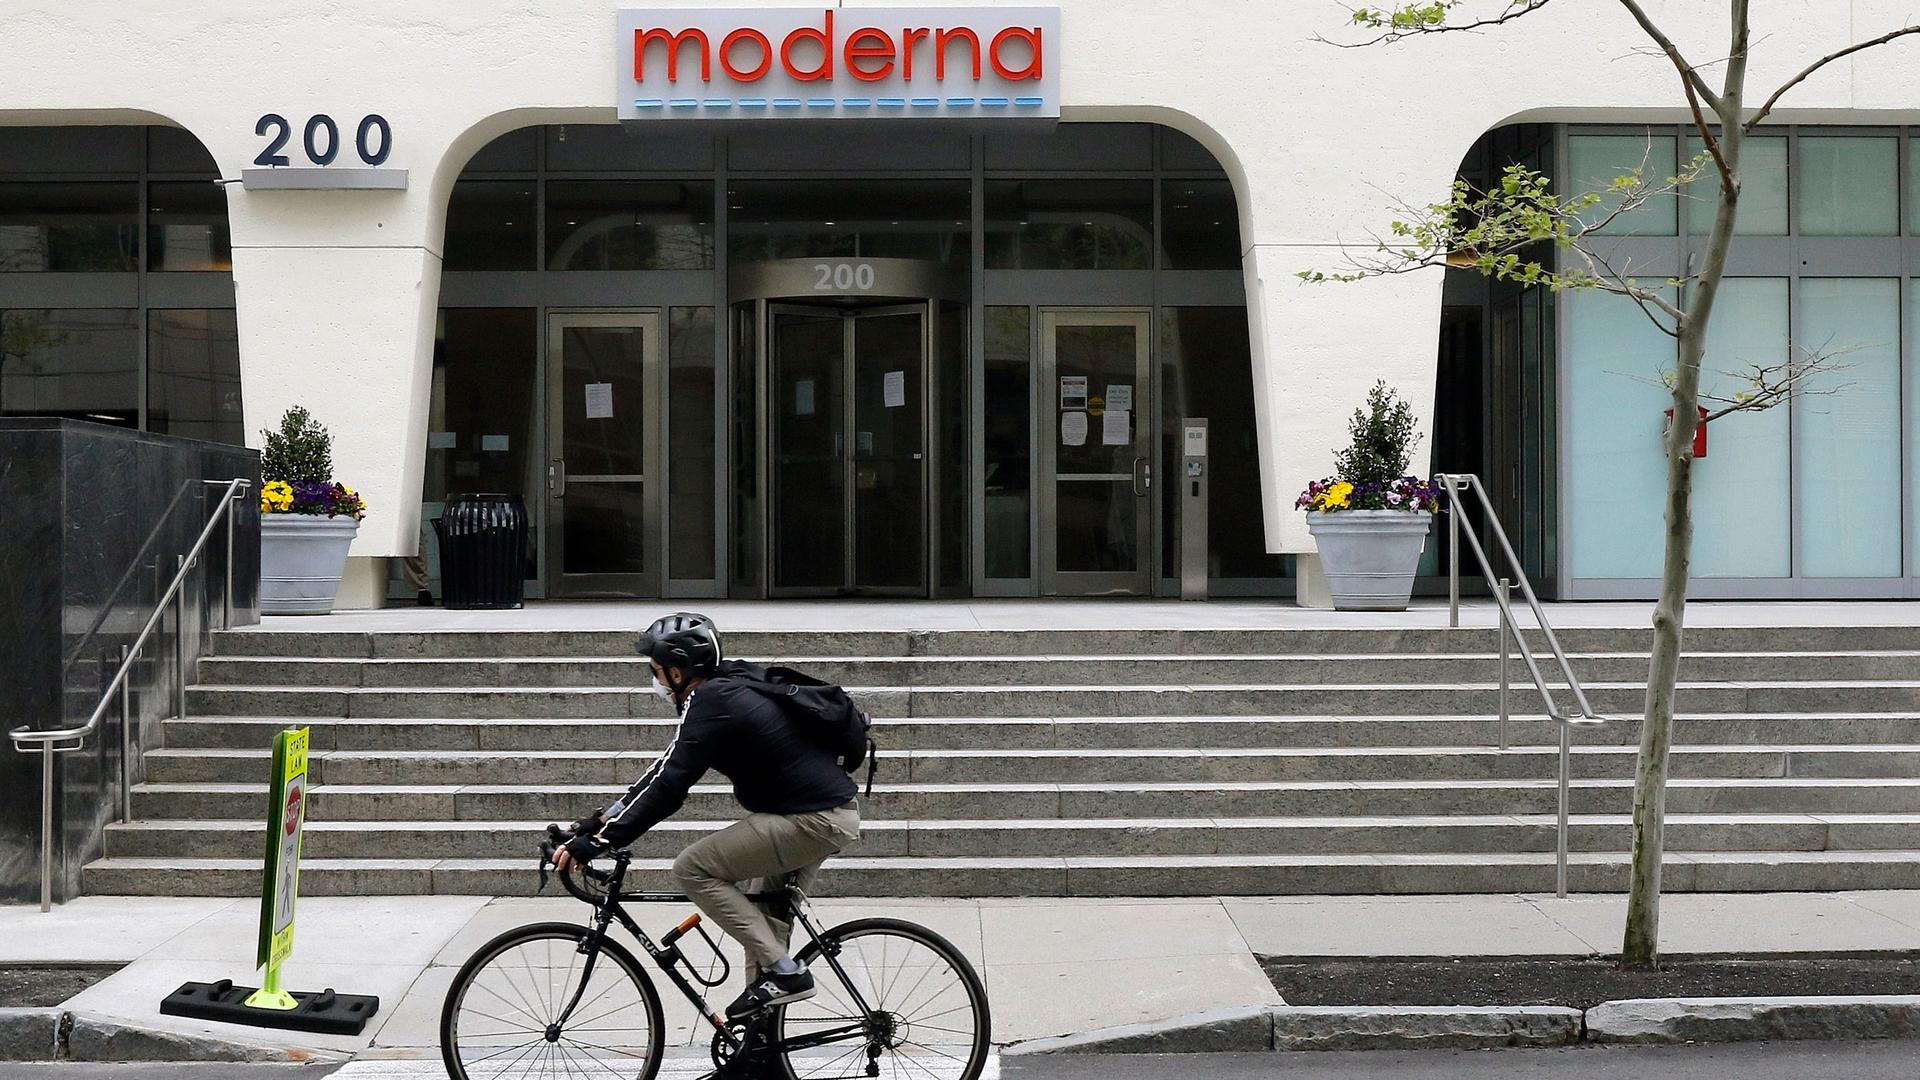 A bicyclist wearing a dark jacket and helmet is shown riding past the outside of drugmaker Moderna.